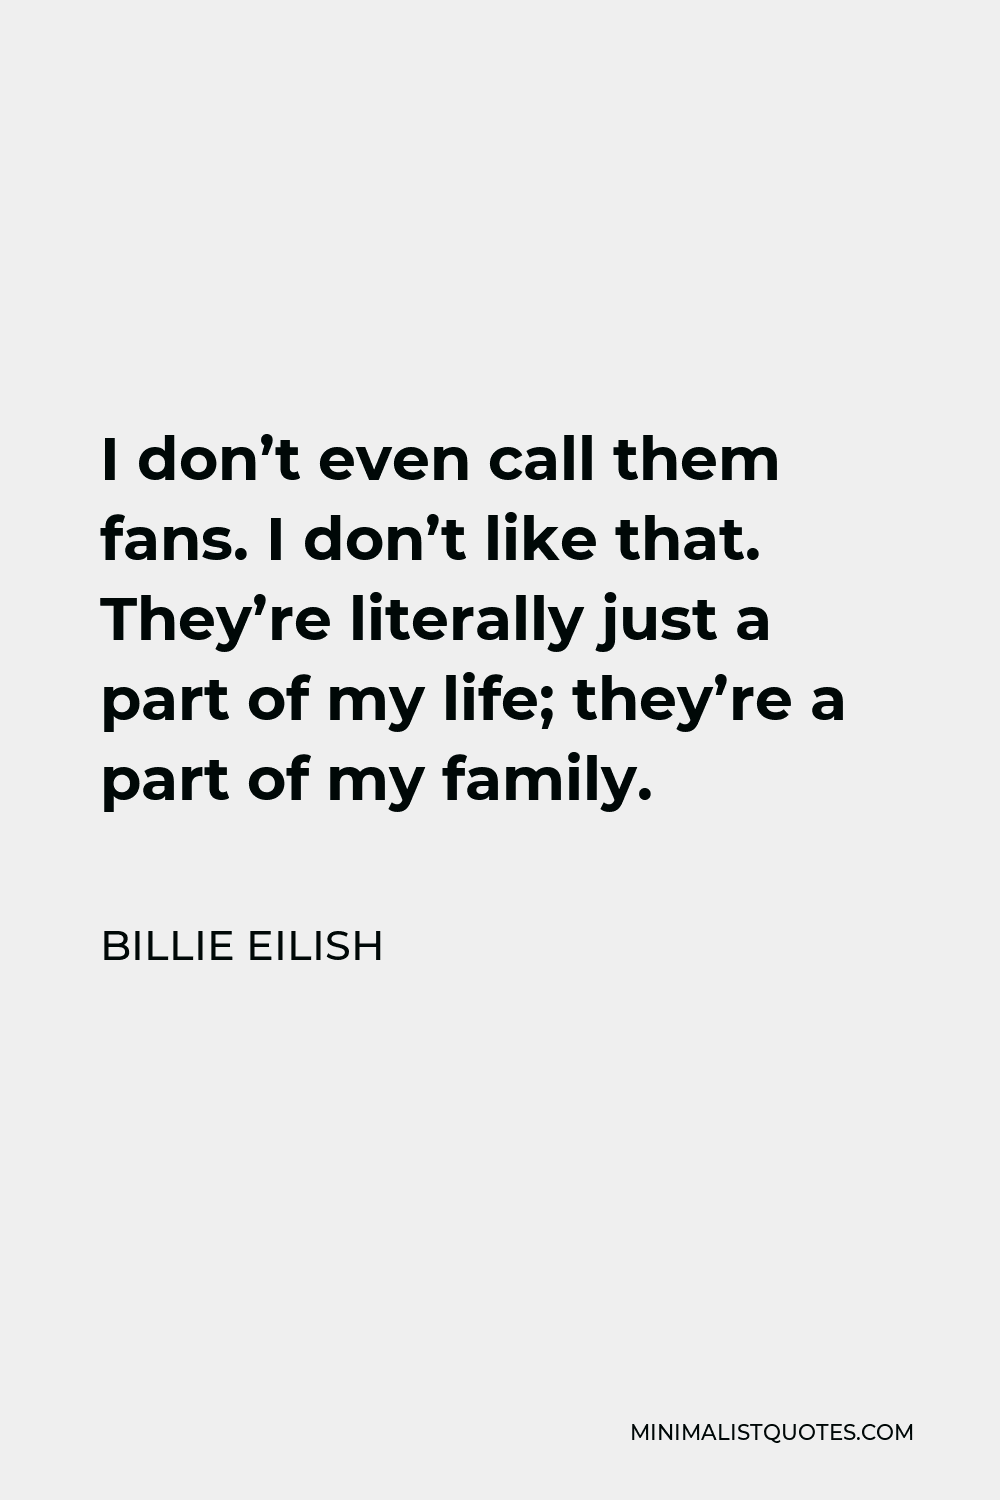 Billie Eilish Quote - I don’t even call them fans. I don’t like that. They’re literally just a part of my life; they’re a part of my family.